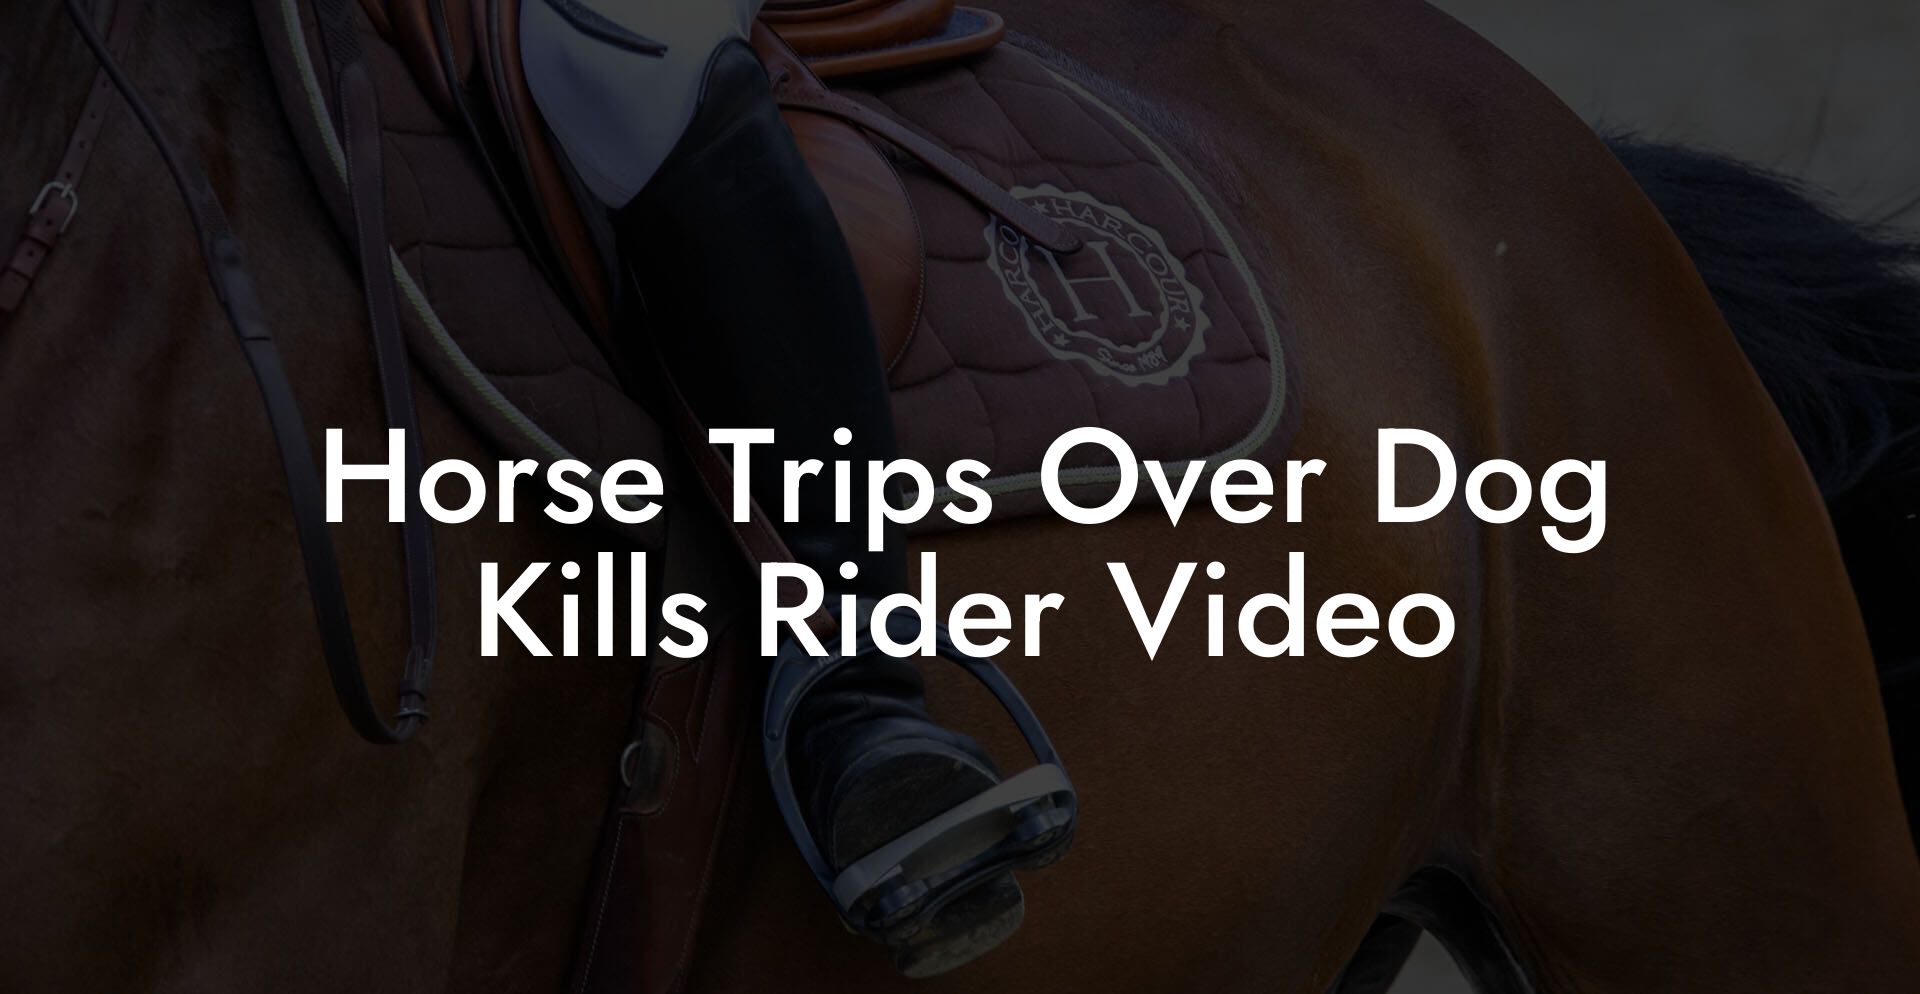 horse trips over dog video